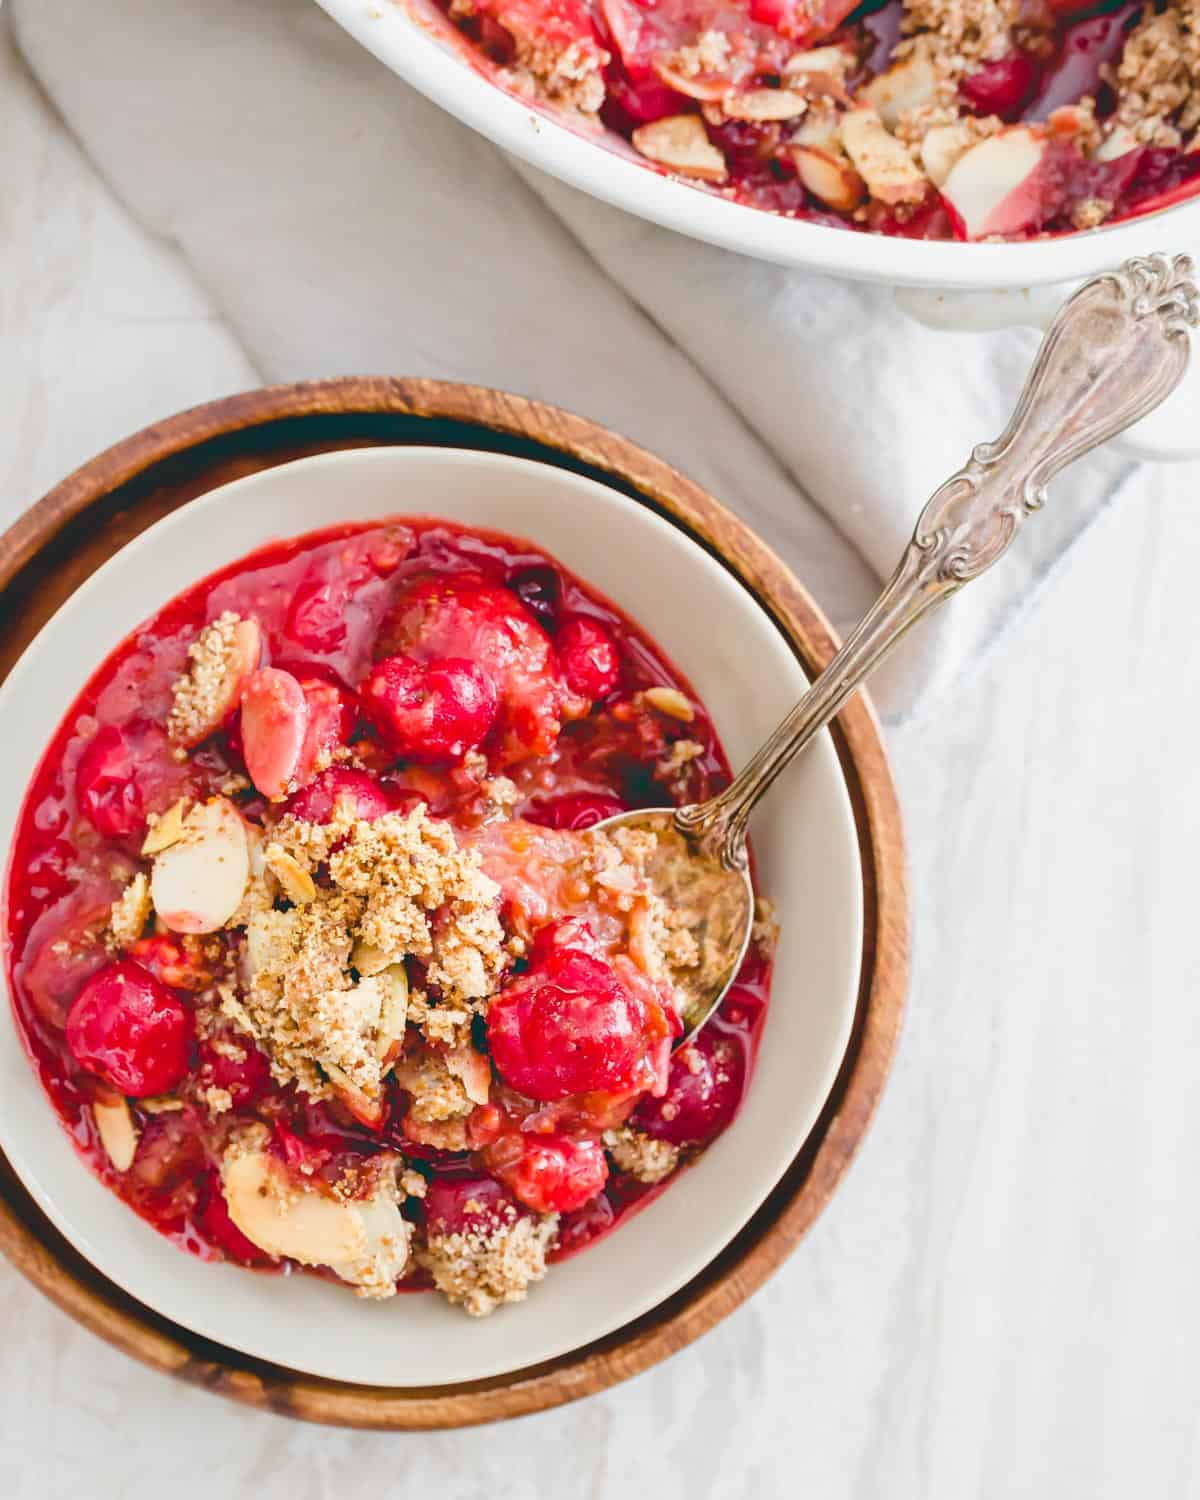 Tart cherry crumble in a serving bowl with a spoon.